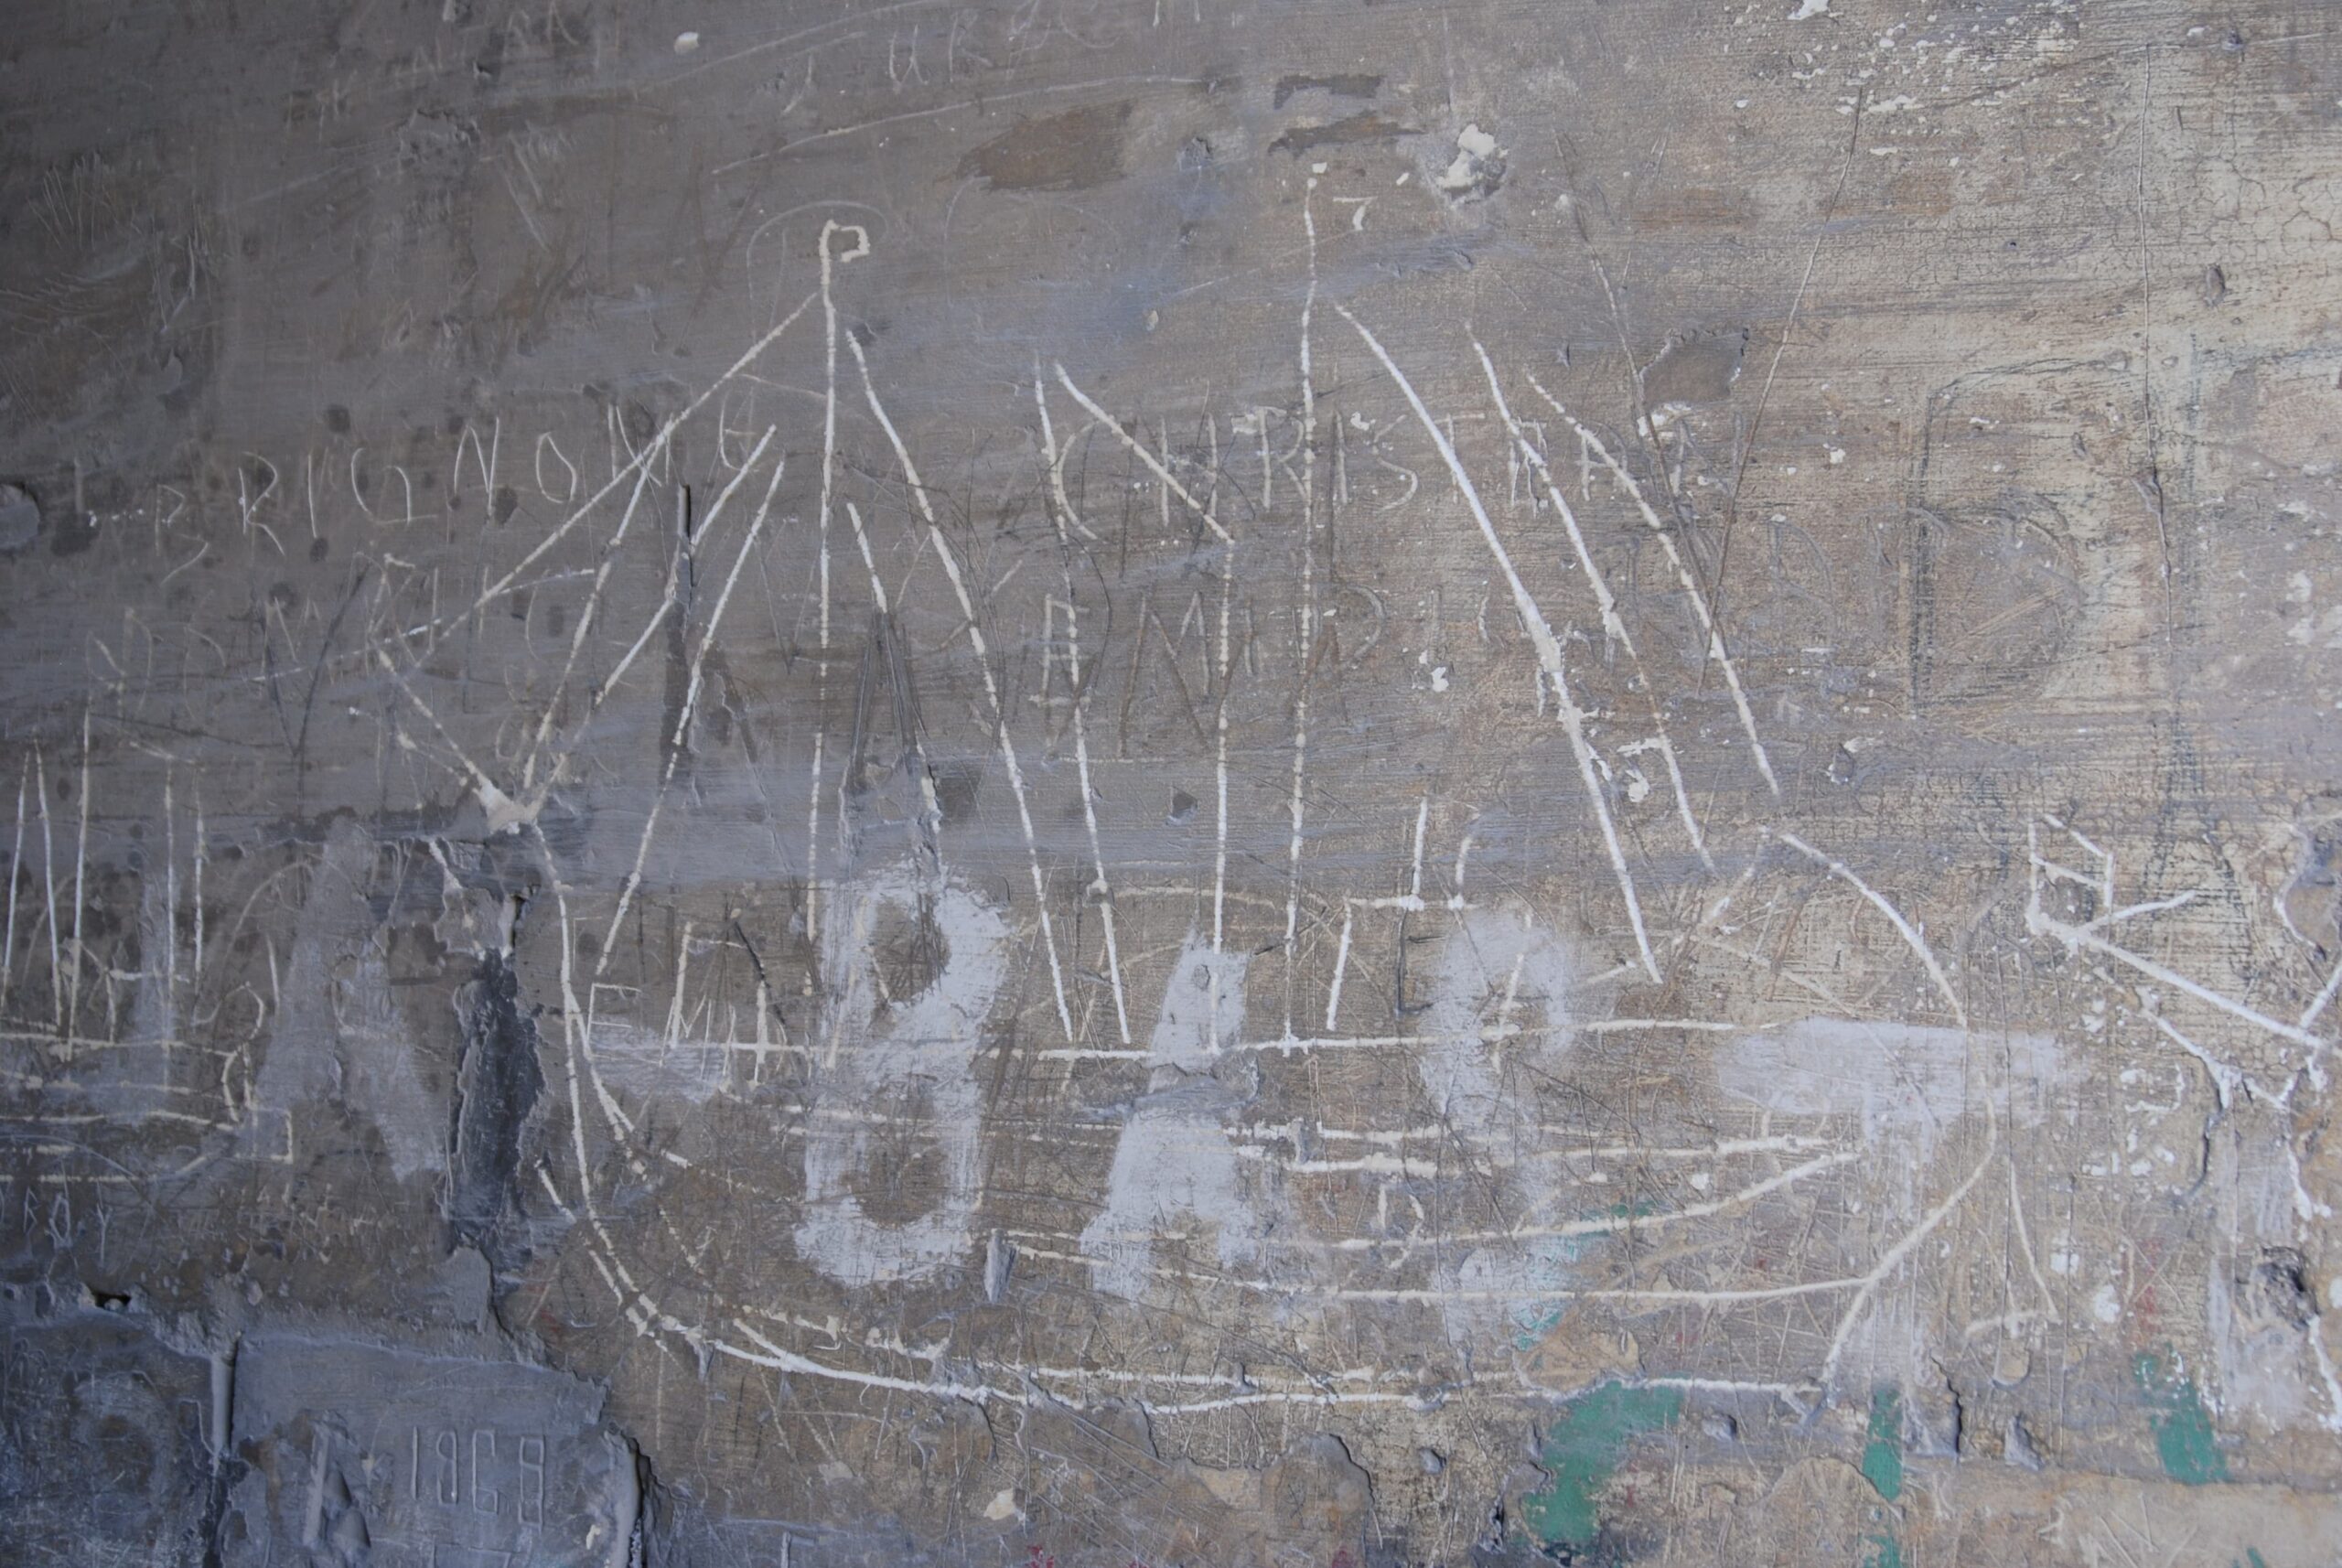 Adjacent to the previous graffito is a similar steam and sail vessel, etched in the same manner.